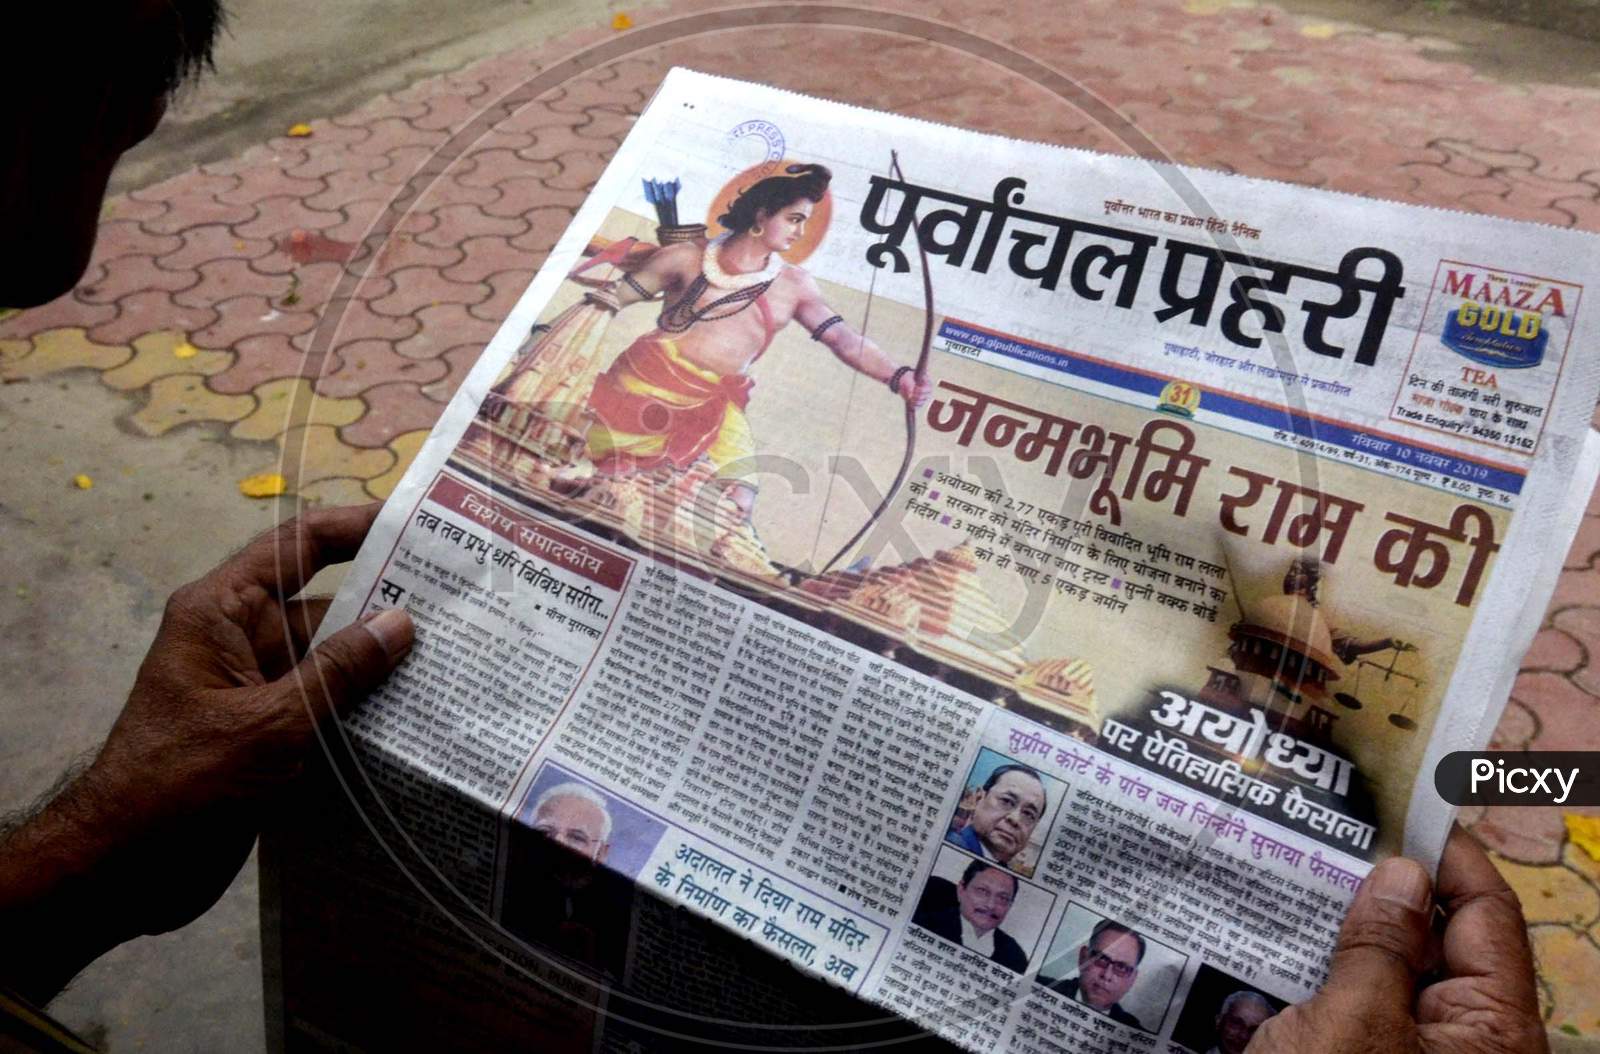 A senior Citizen  read newspapers fronted with headlines on Ayodhya case verdict